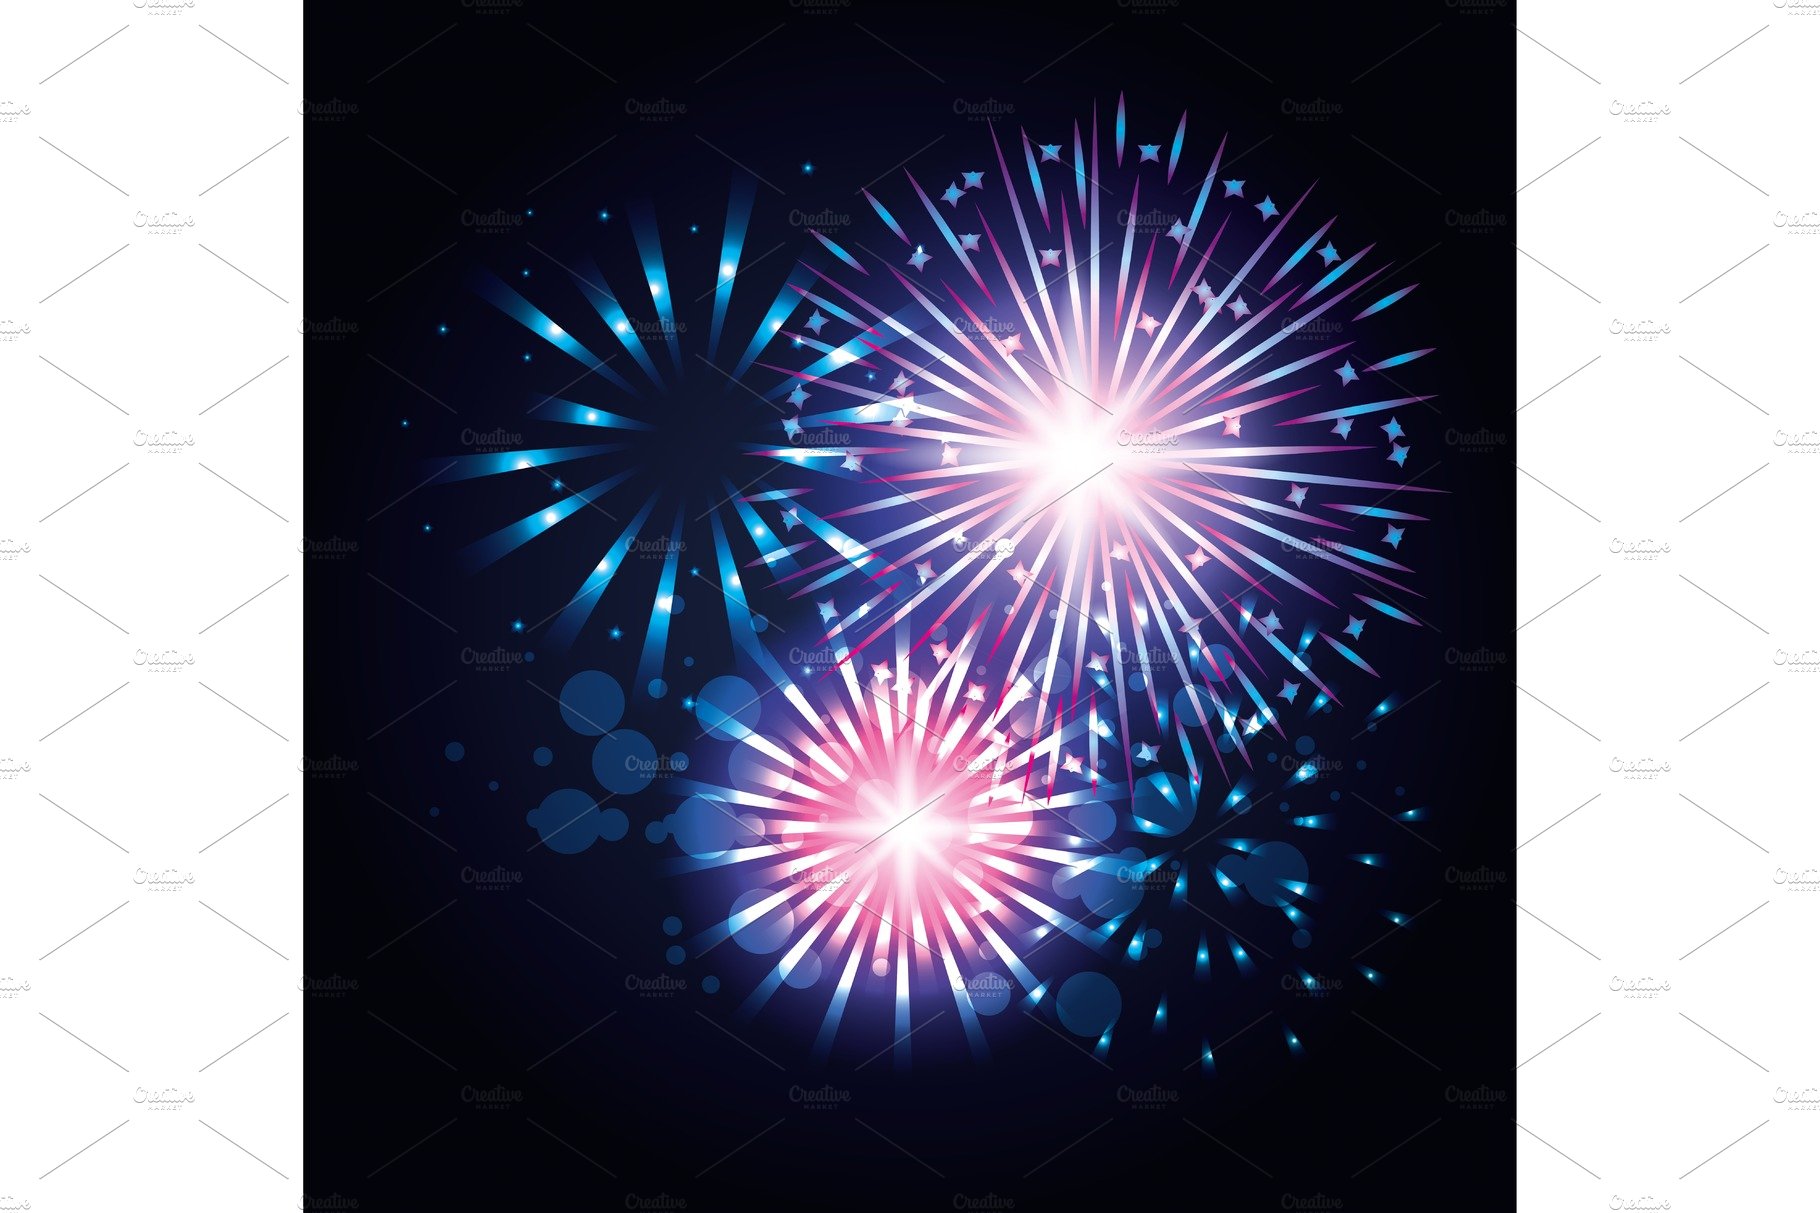 decorative fireworks explosions cover image.